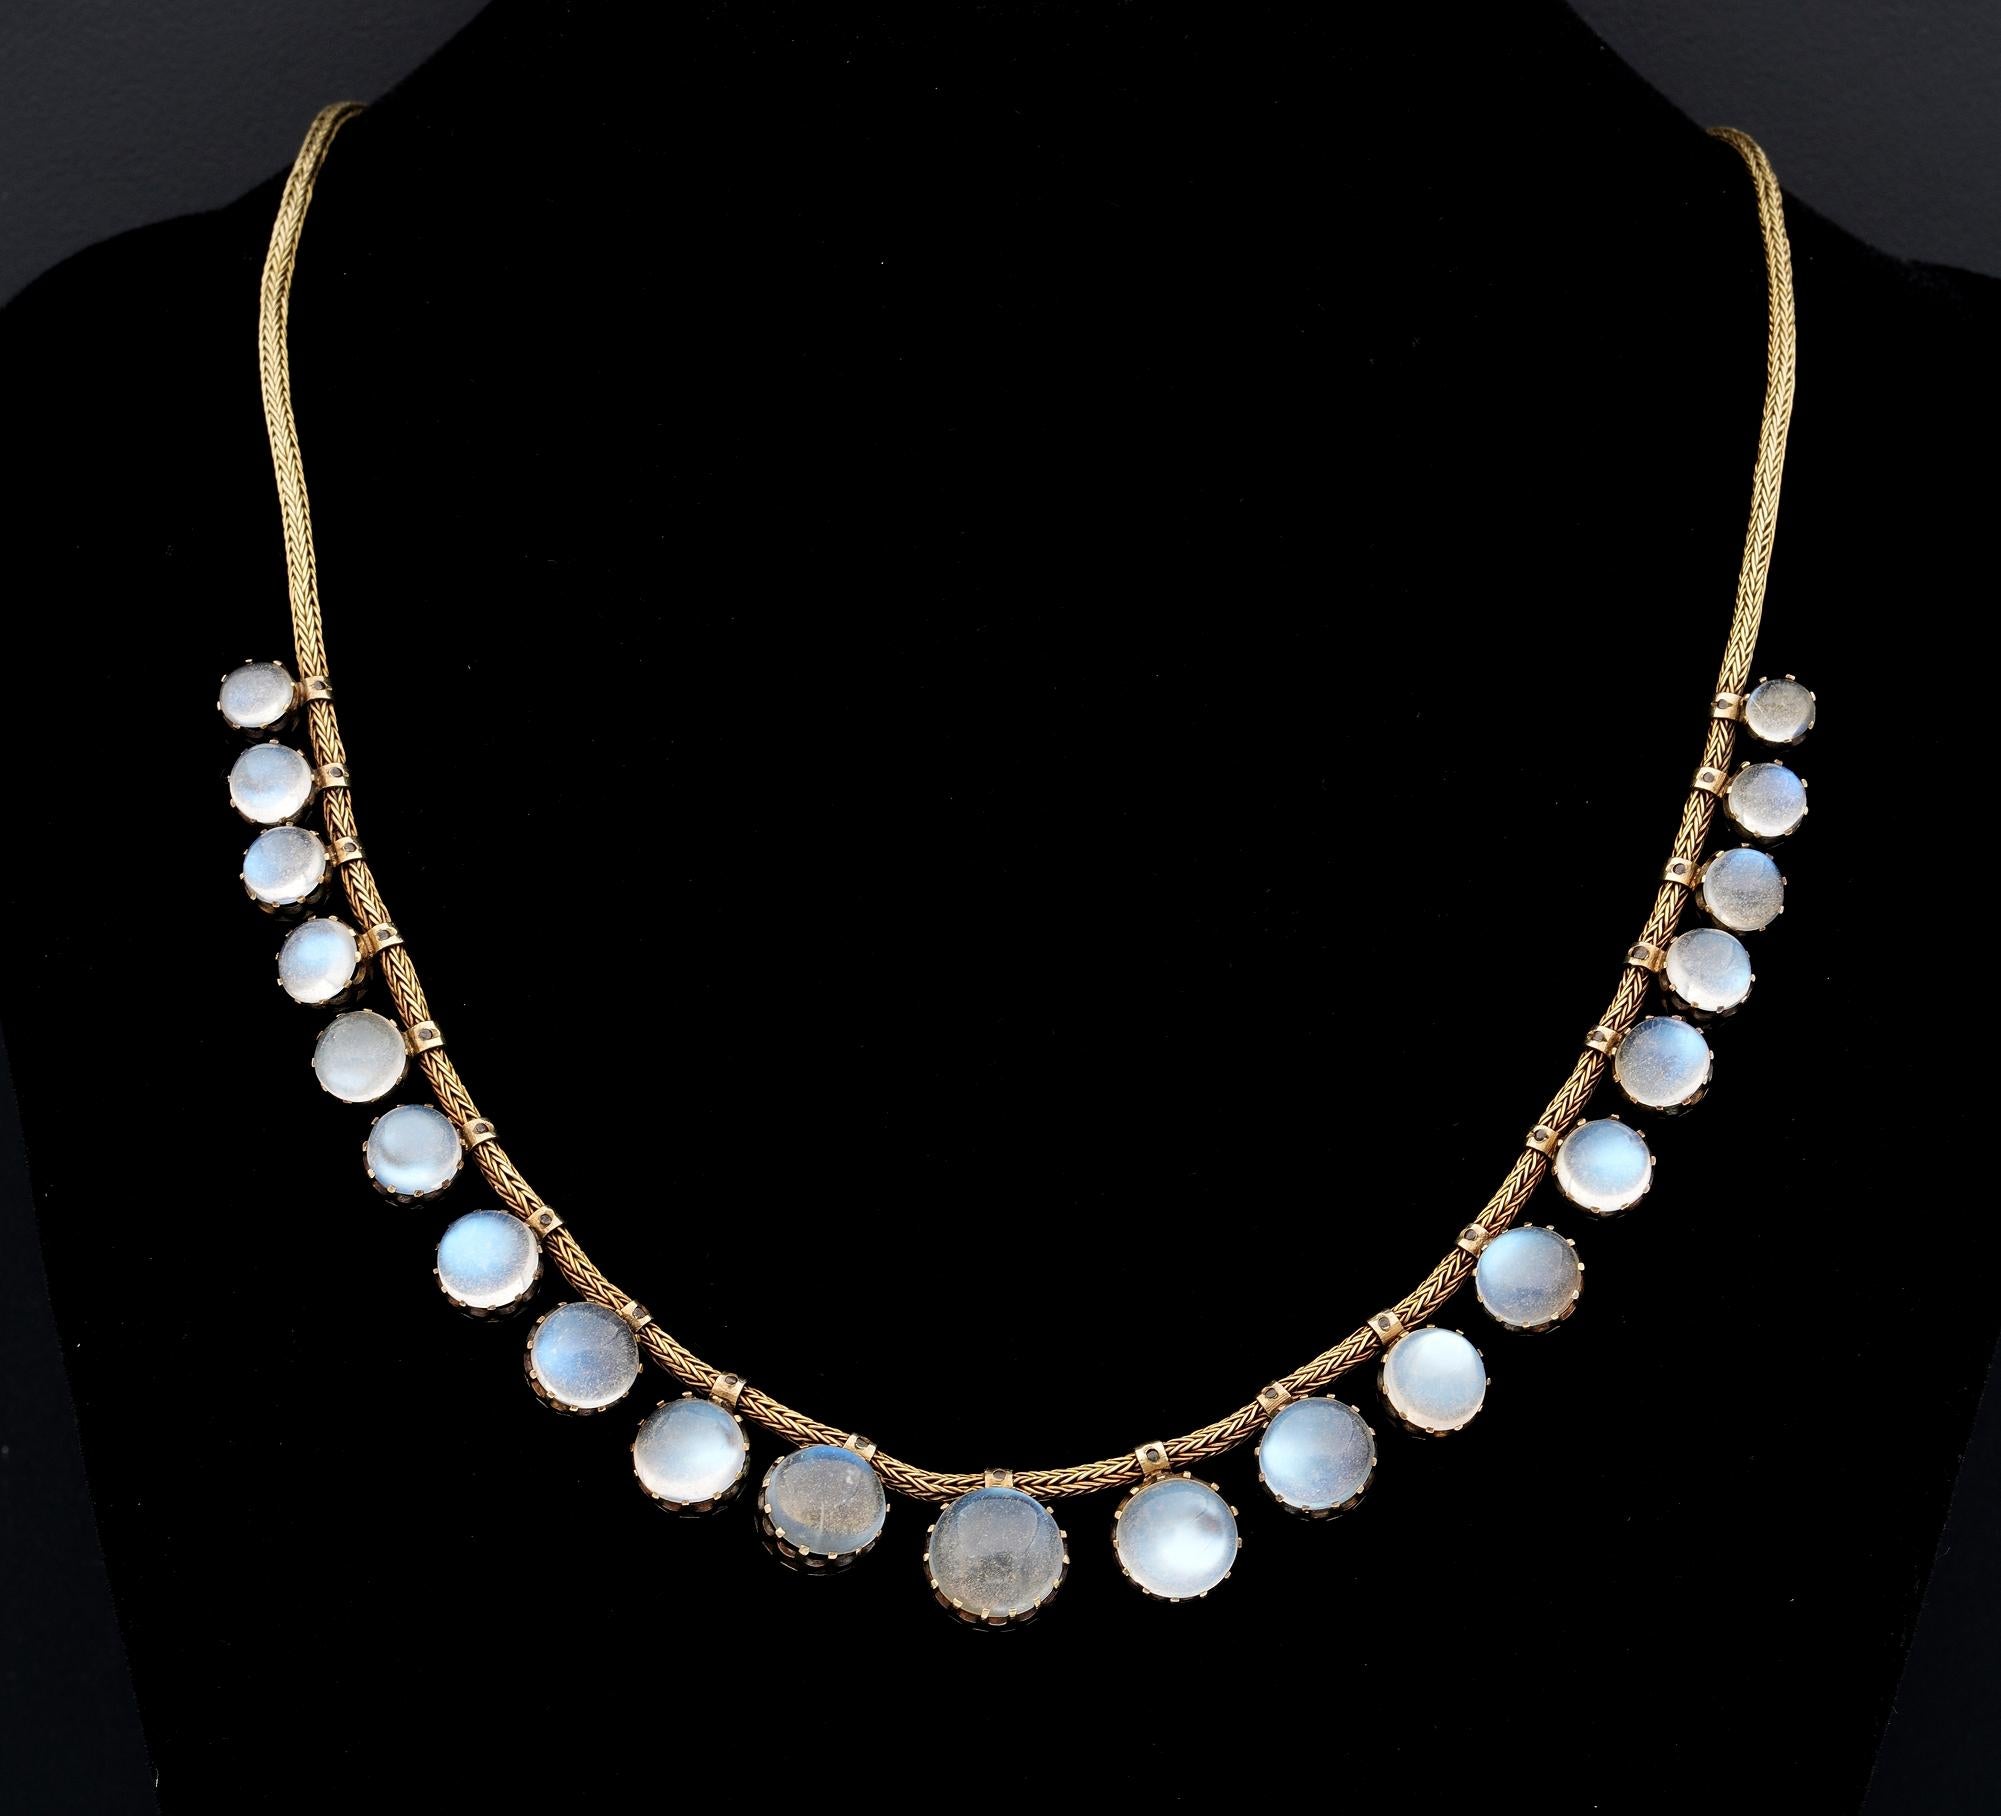 Victorian Celestial Must!

Rare 1870 ca Victorian necklace of understated elegance
Superbly hand crafted of solid 18 KT gold – snake chain from which hang 21 Celestial antique round cabochons - Sri Lanka origin - shimmering Moonstones with Blue